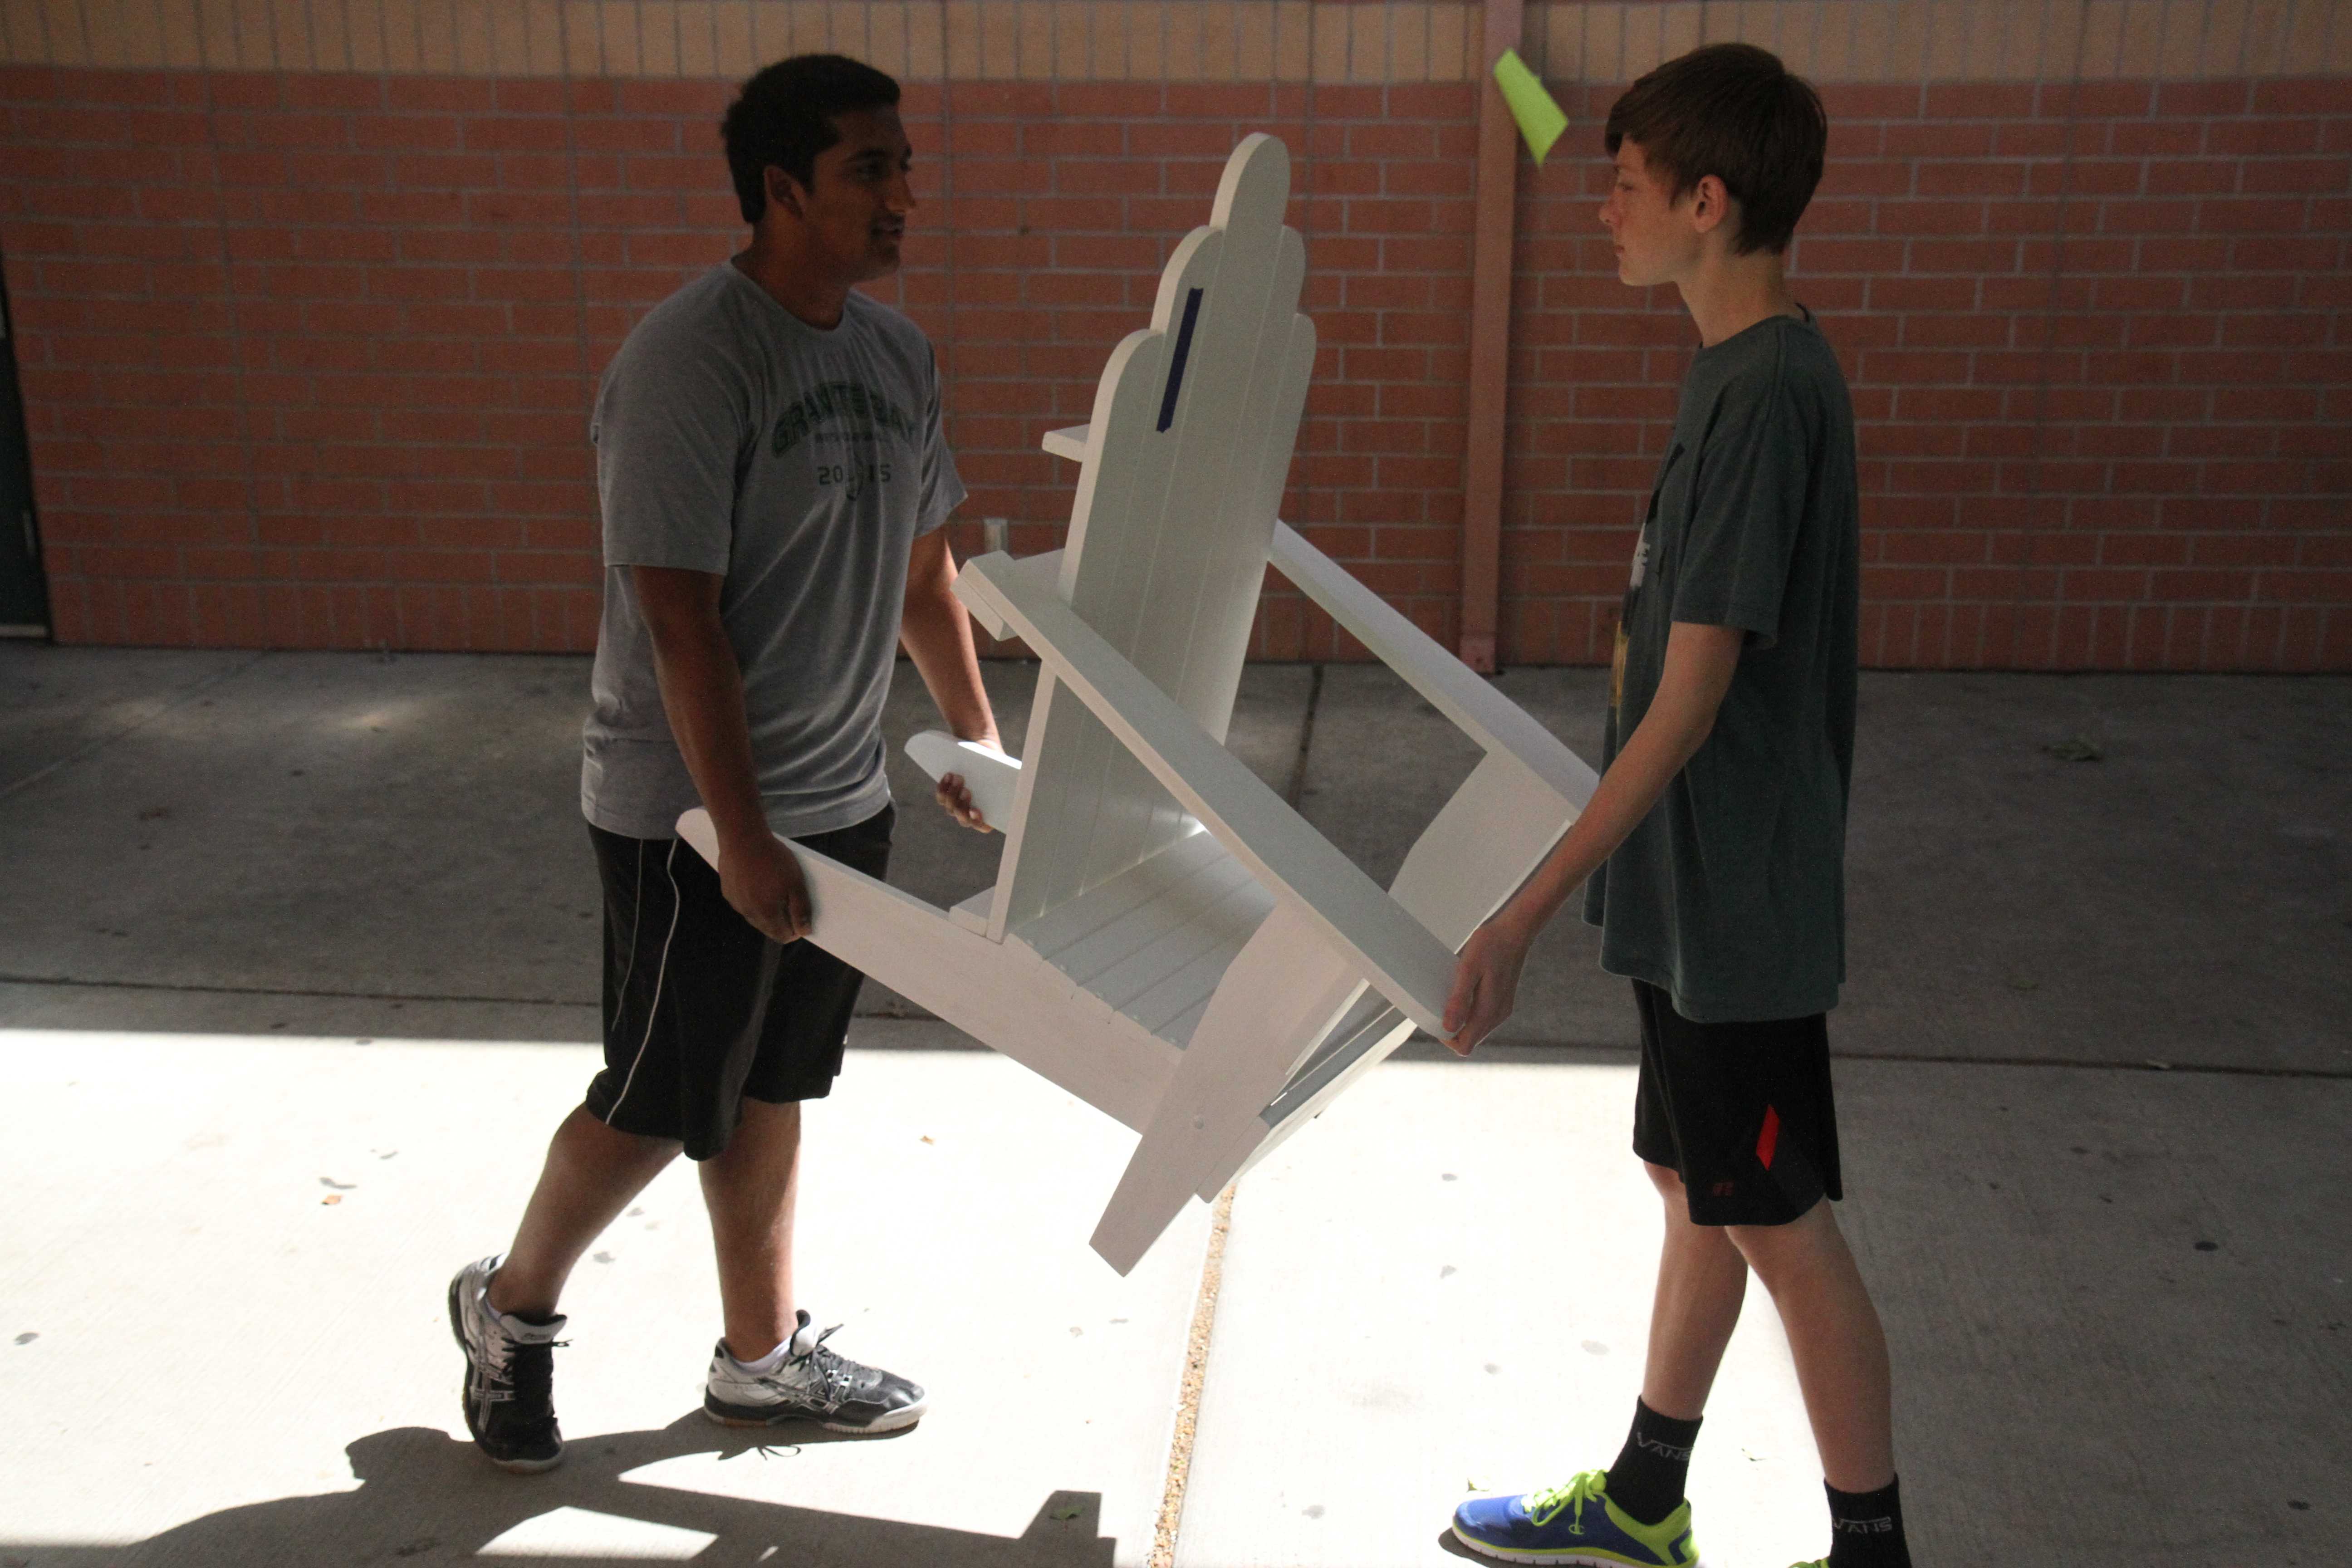 To take home the chair he made, sophomore Tyler Gregory, with his friend Rohan Dhamejani, carry the chair across campus. Gregory made the chair in woodshop, a class he loves because he can express himself and make what he wants. “It took me six weeks to make my chair, and it’ll go on the patio at my house,” Gregory said. Photo by Ava Lindley